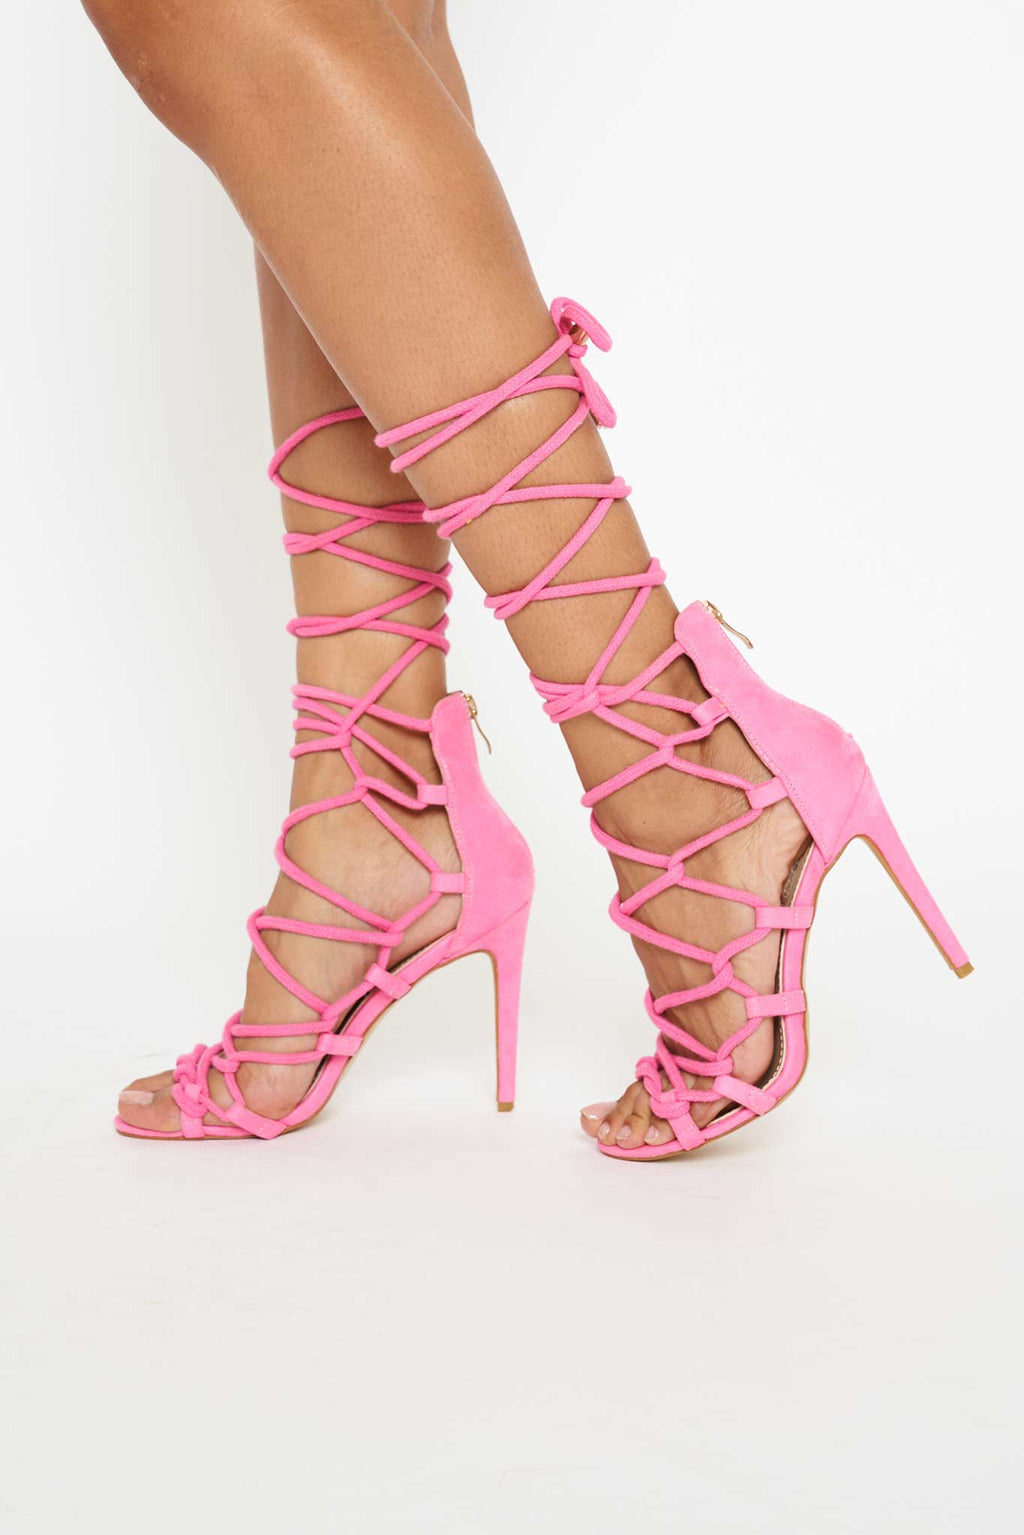 Skylar Rope Lace Up Heels in Hot Pink 